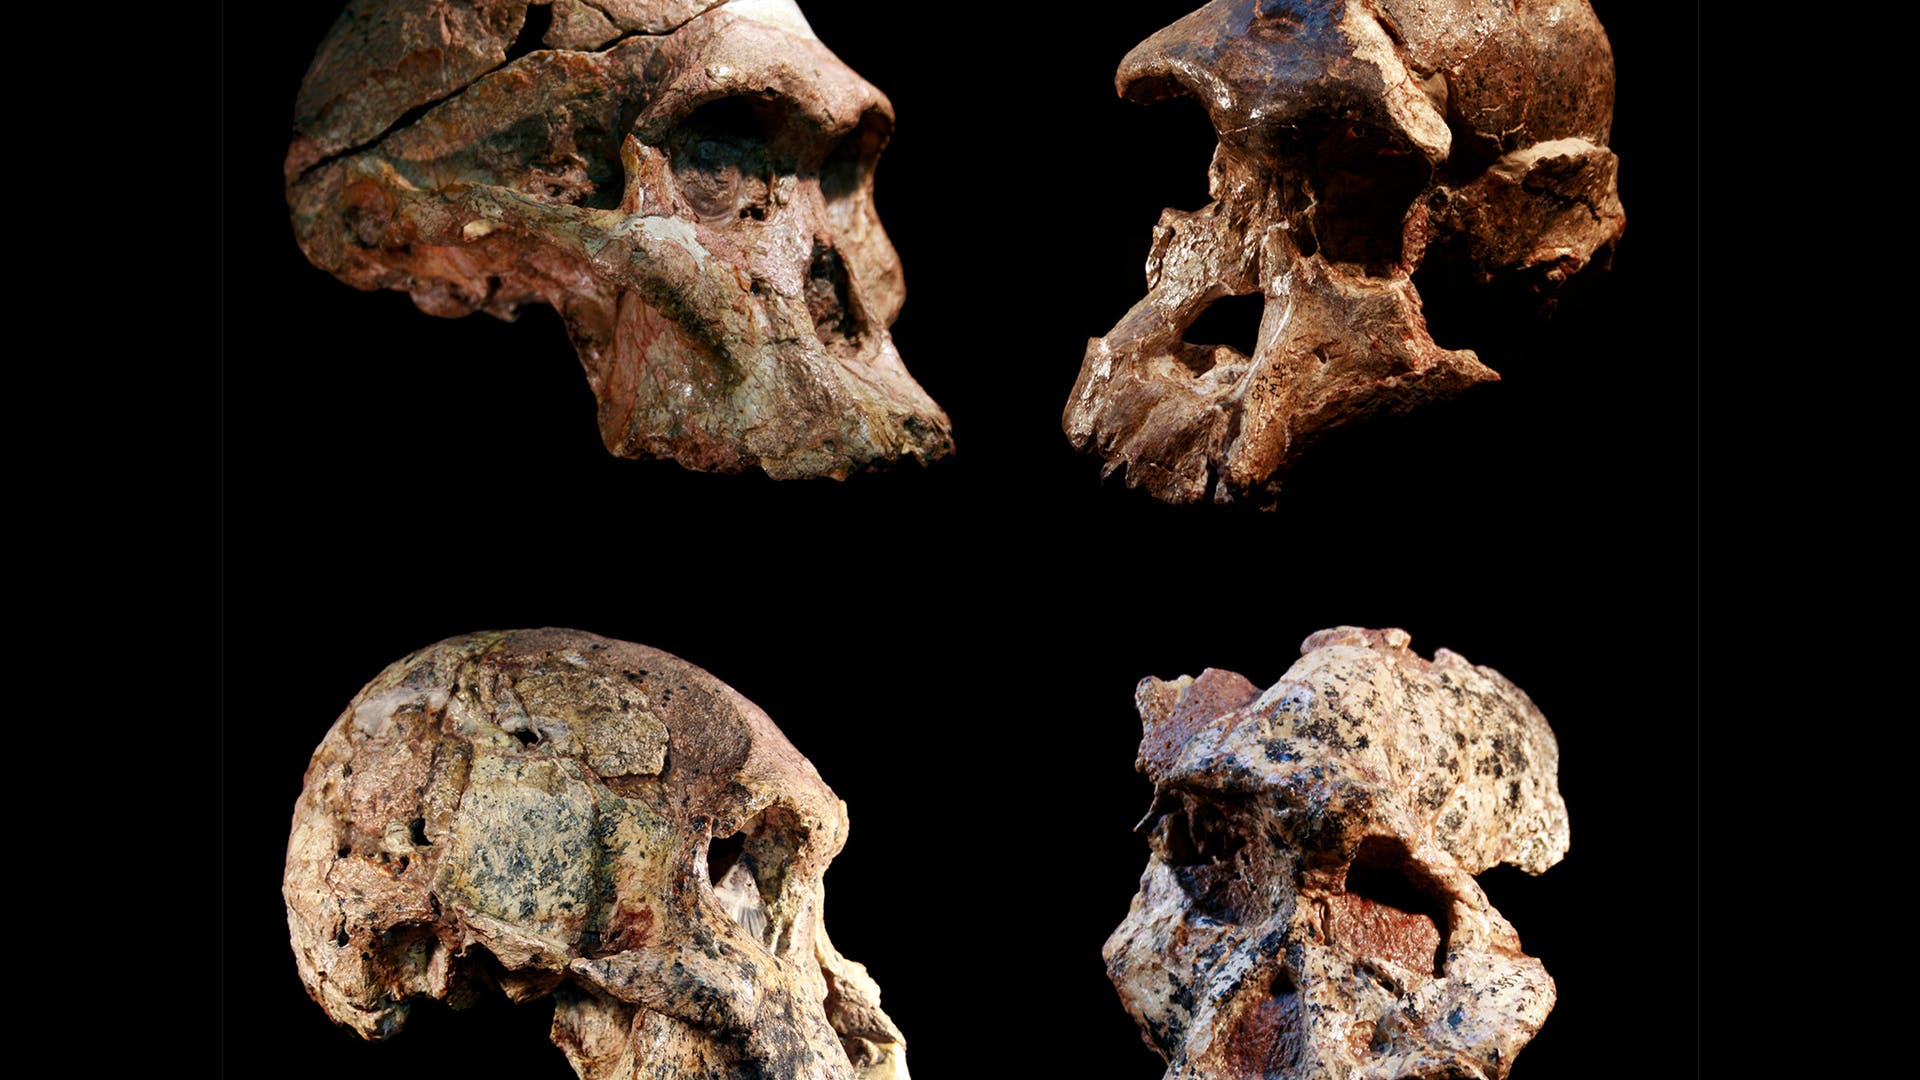 Pre-humans lived a million years earlier than previously thought